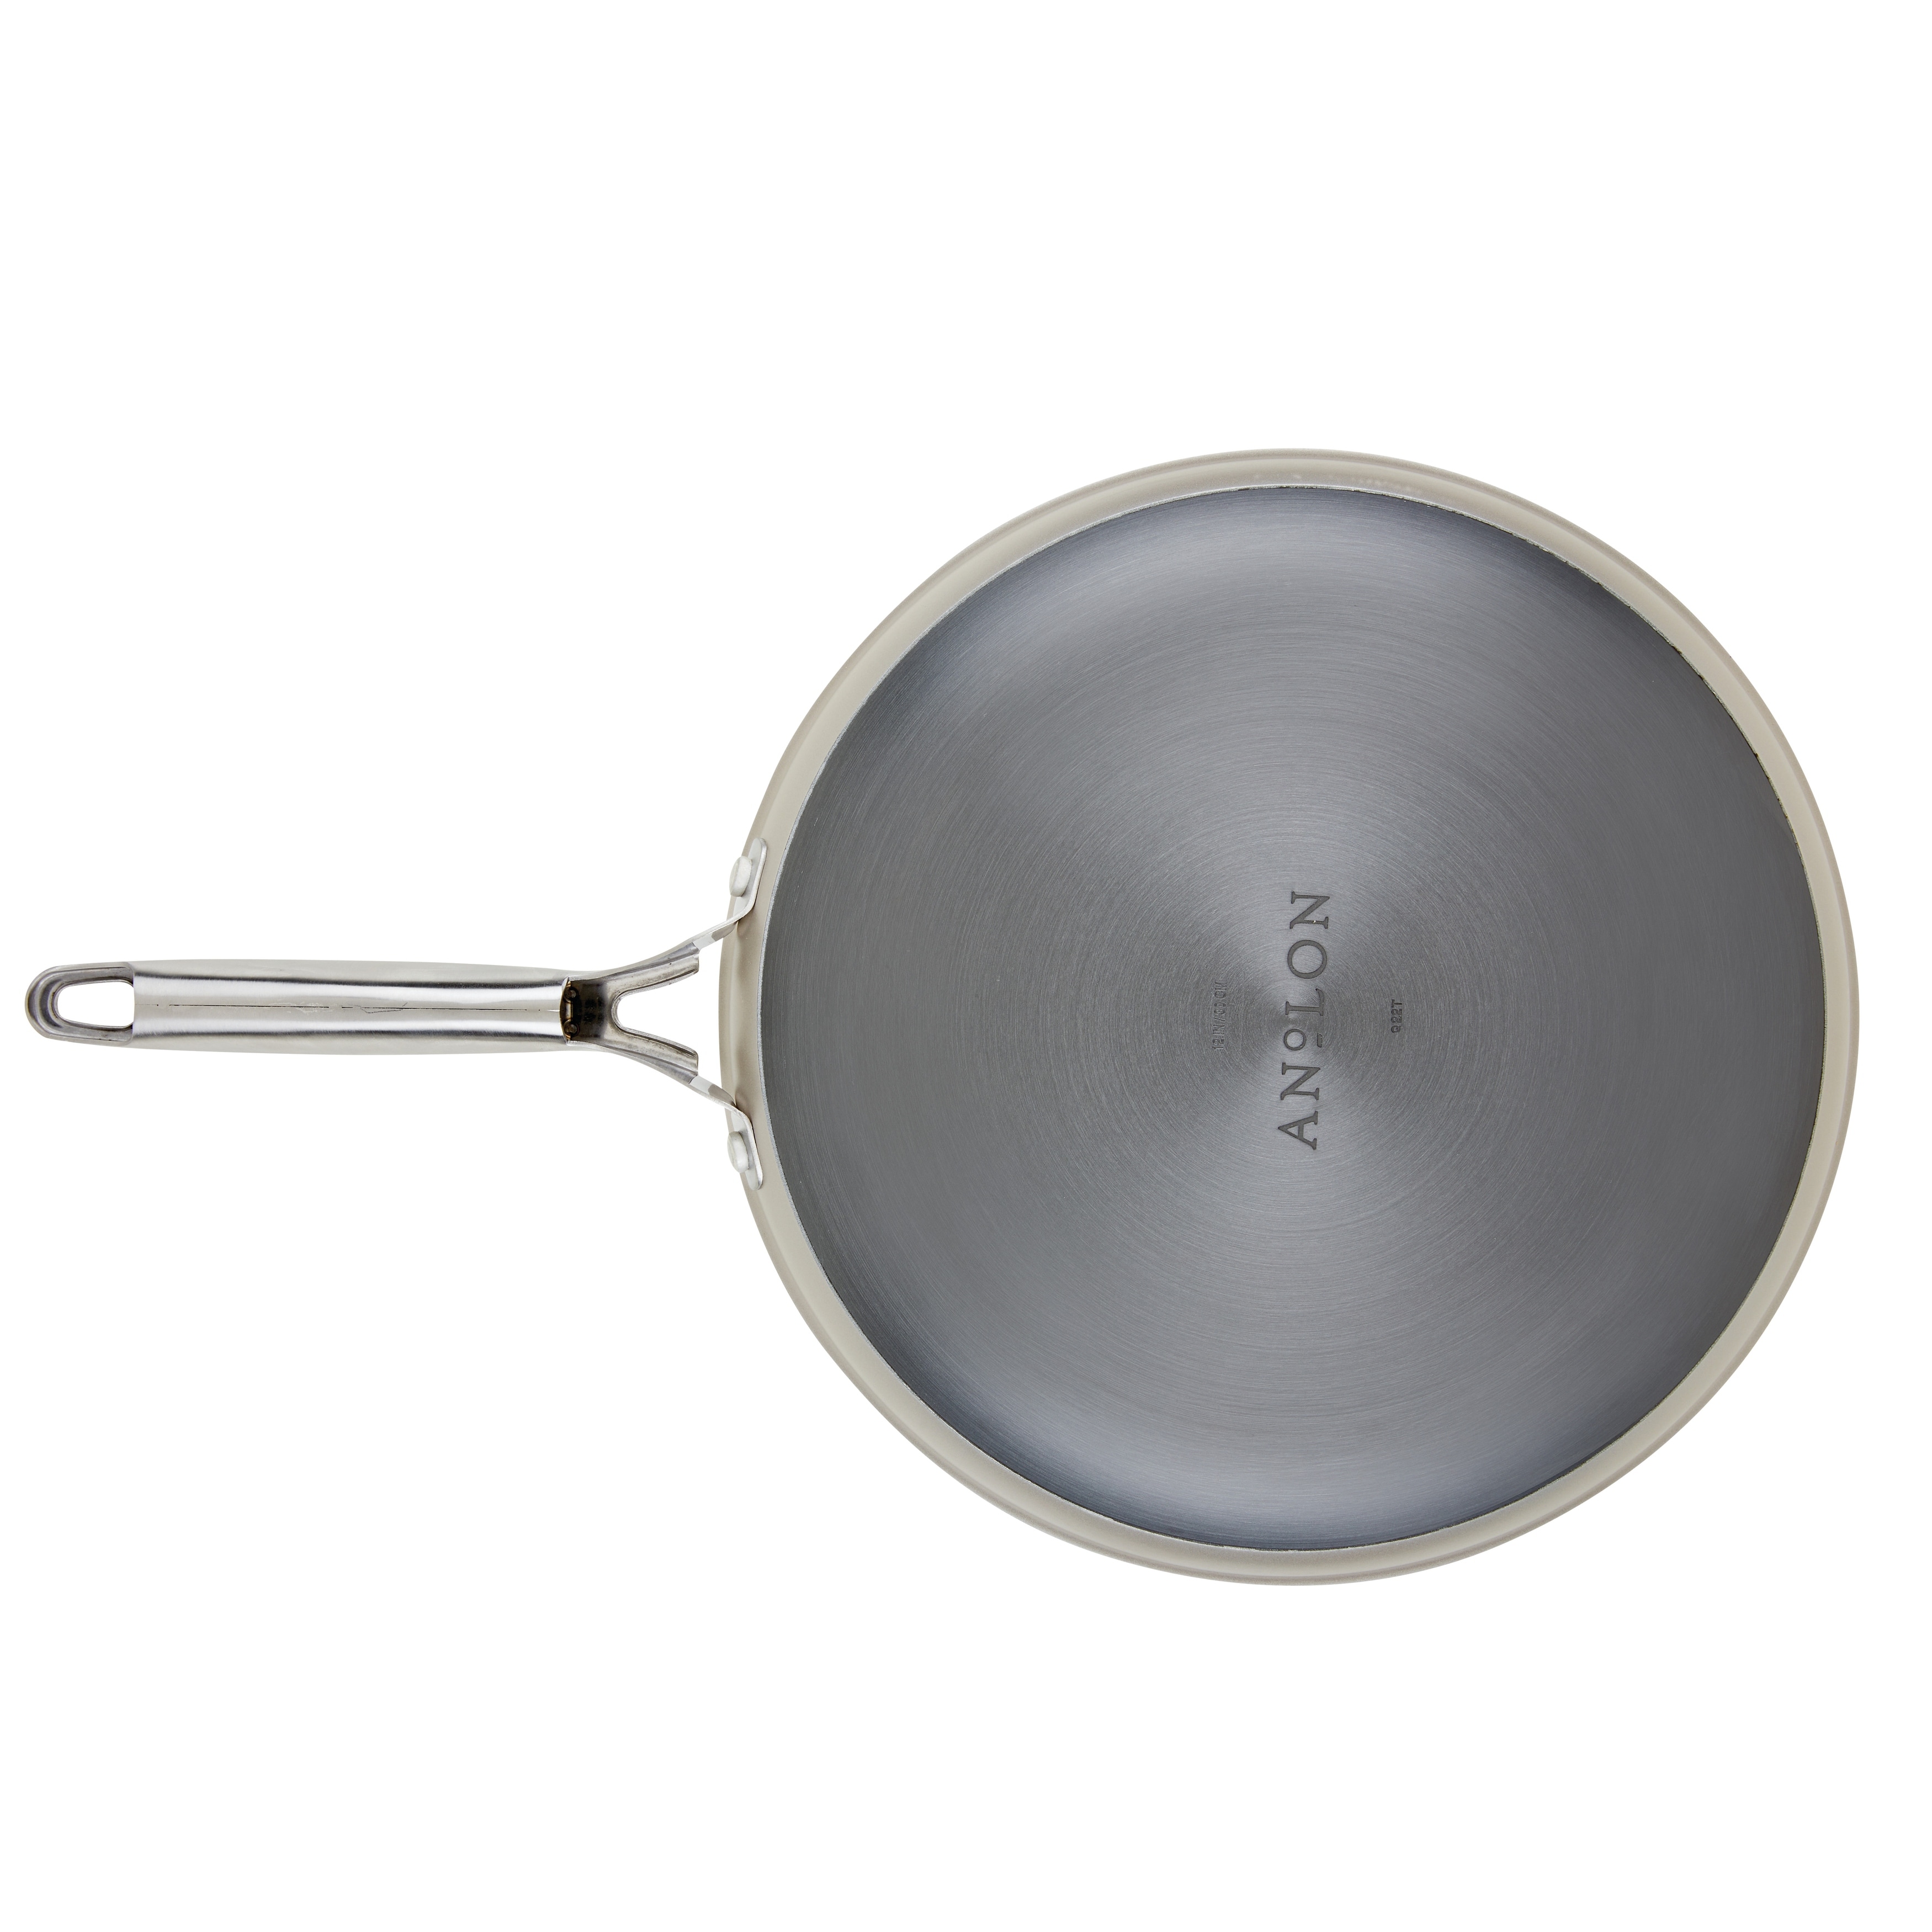 https://ak1.ostkcdn.com/images/products/is/images/direct/2a1e6ba223b7e4724e30d7fdbb72e1e4d9bd284e/Anolon-Achieve-Hard-Anodized-Nonstick-Frying-Pan%2C-12-Inch.jpg